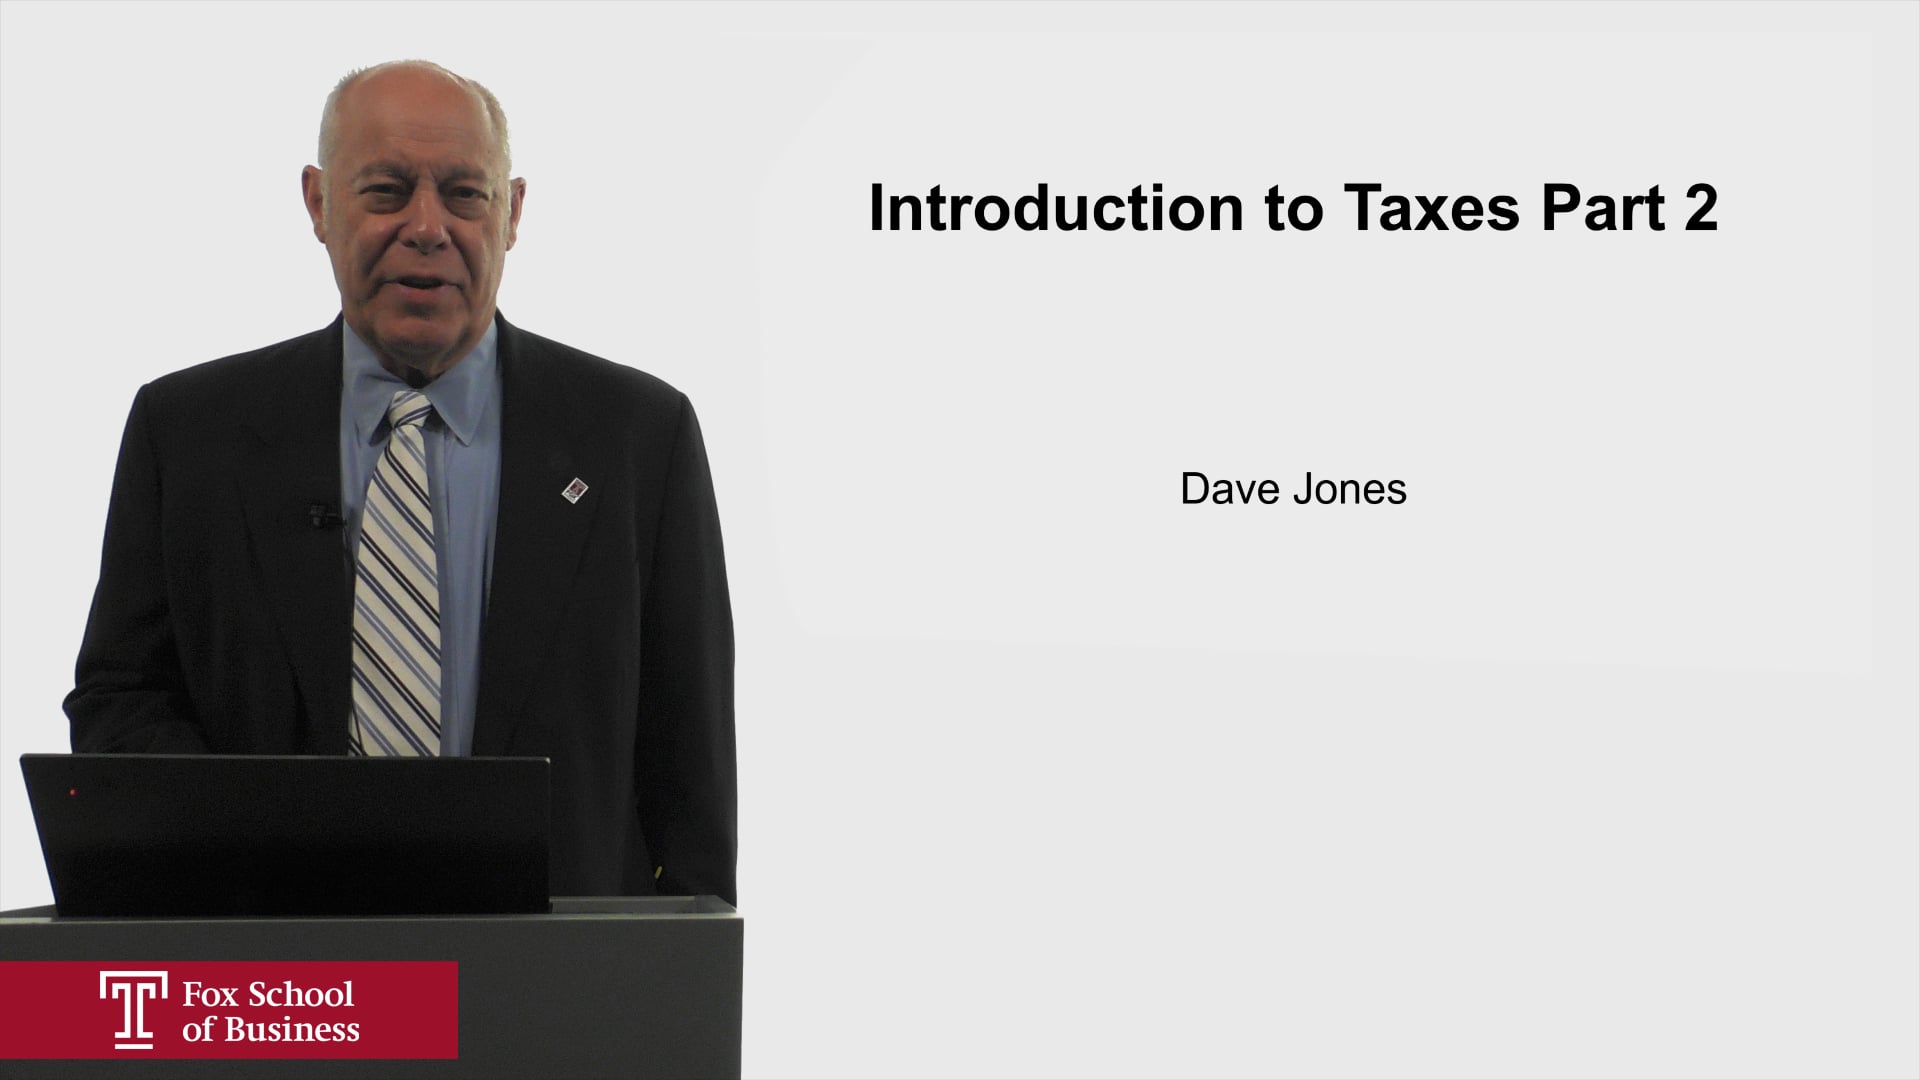 Introduction to Taxes Part 2